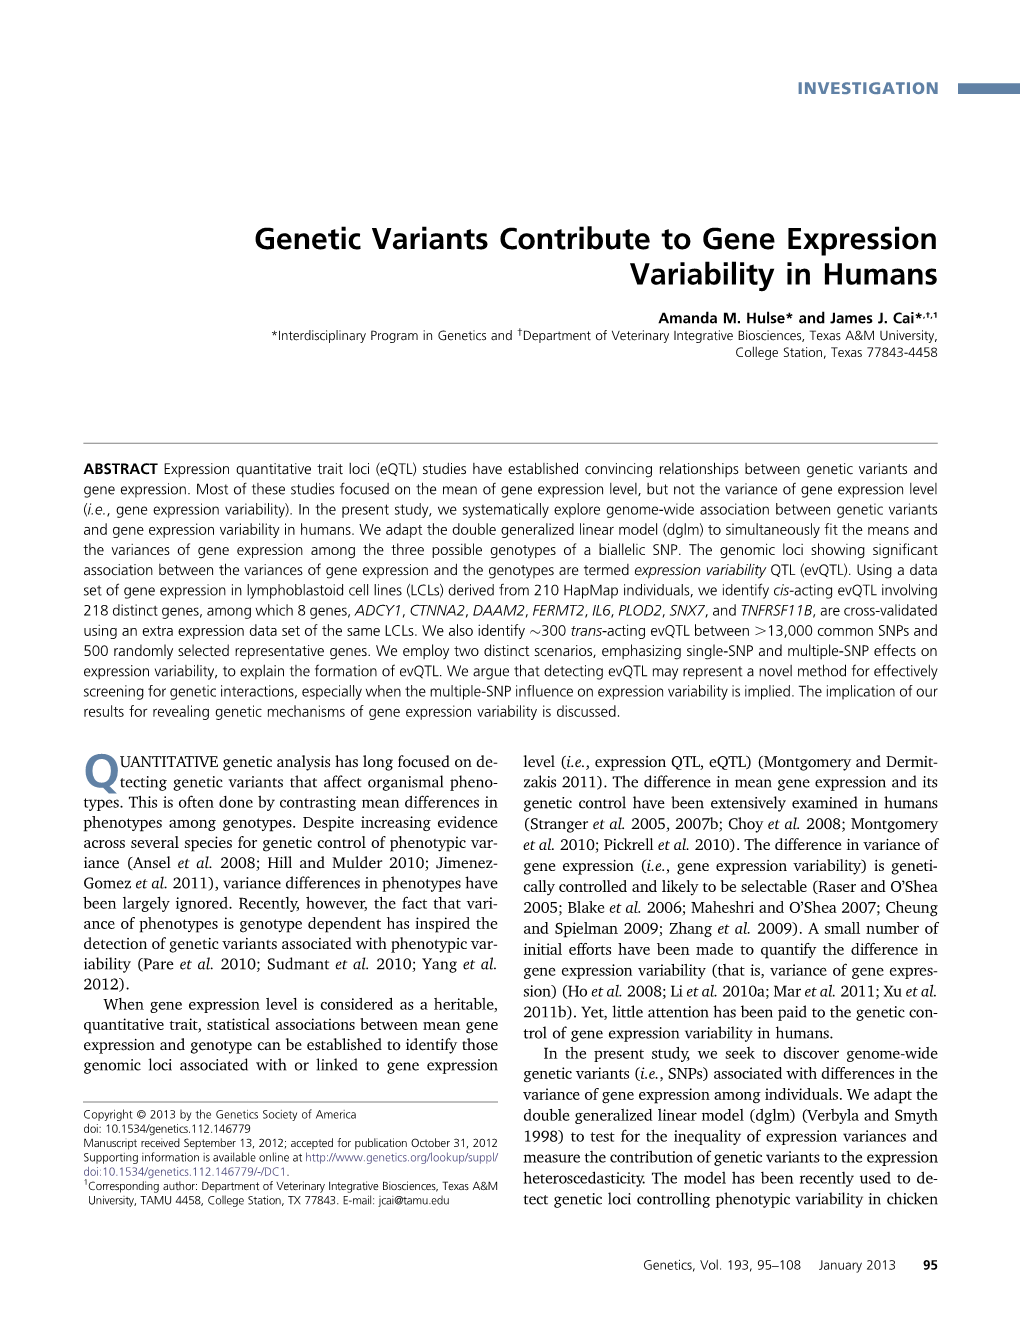 Genetic Variants Contribute to Gene Expression Variability in Humans